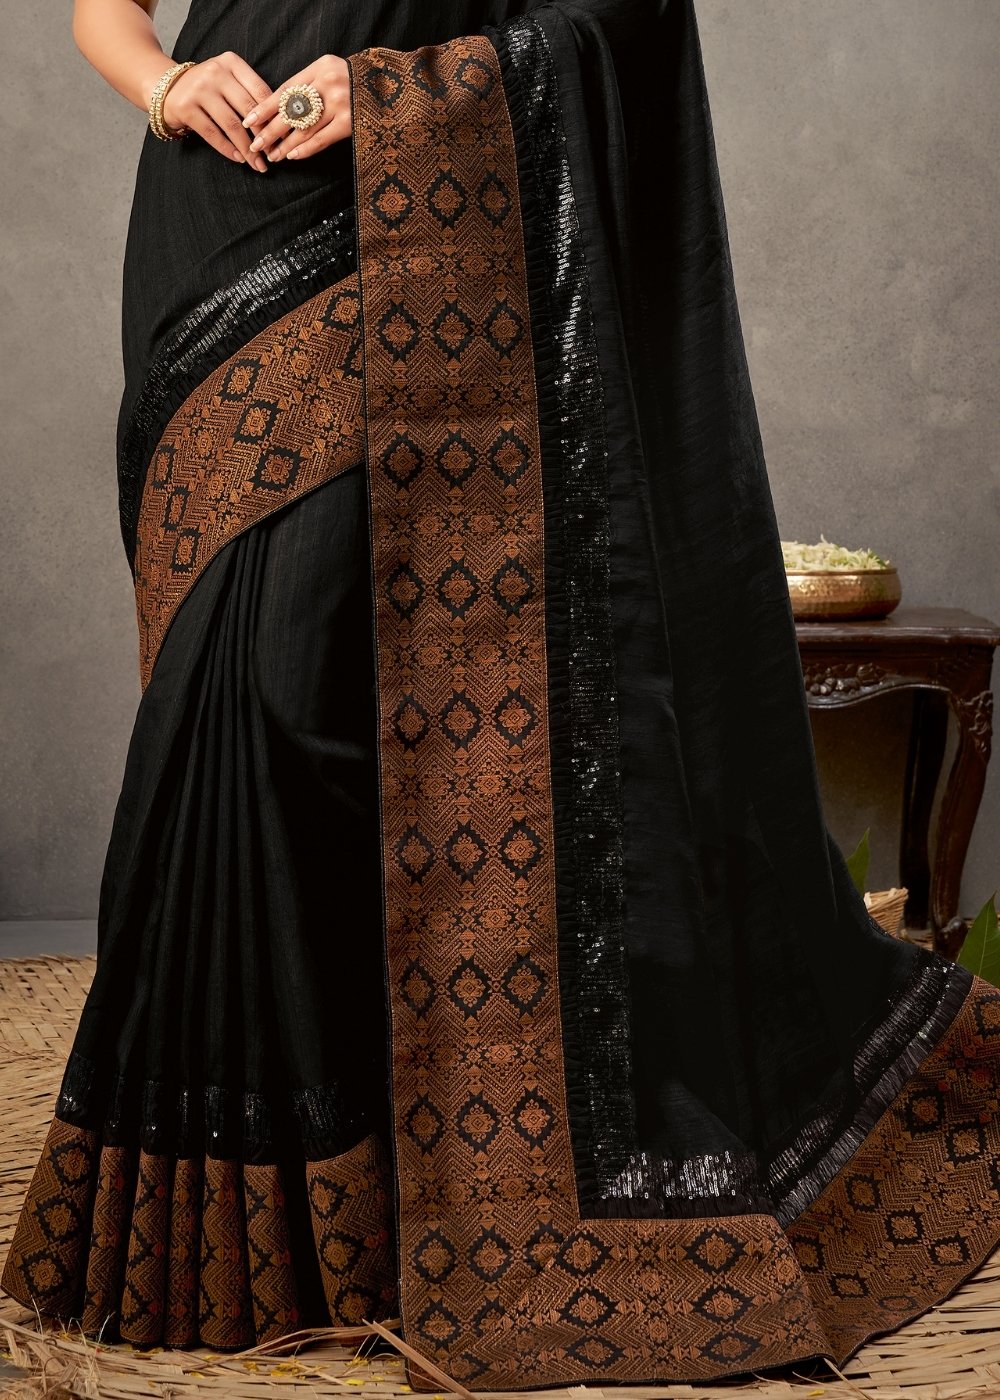 Onyx Black Tussar Silk Saree with Thread & Sequins Embroidery